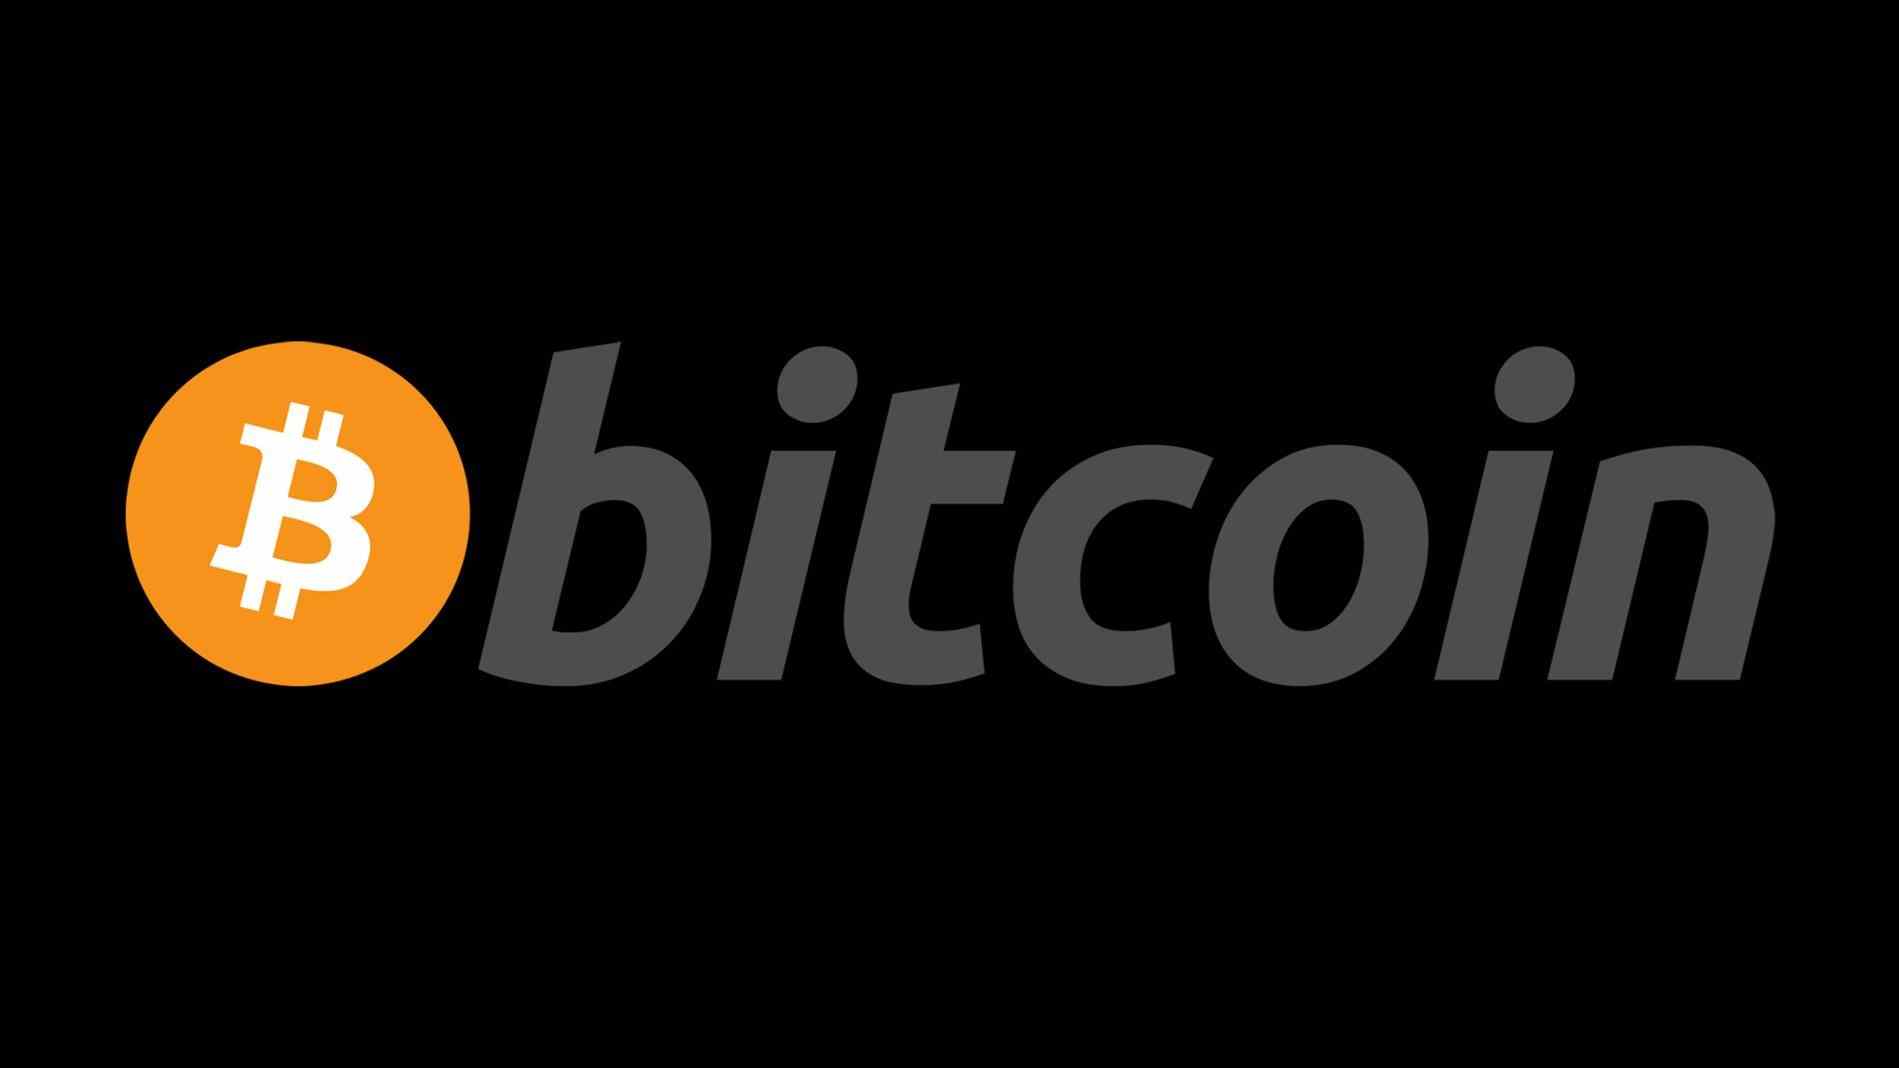 bitcoin-logo-transparent-background-about-free-lessons-filei-love-tshirt-design-vector-based-pdf-filepng-filei-bitcoin-logo-transparent-background-love-tshirt-design-vector-based.jpg